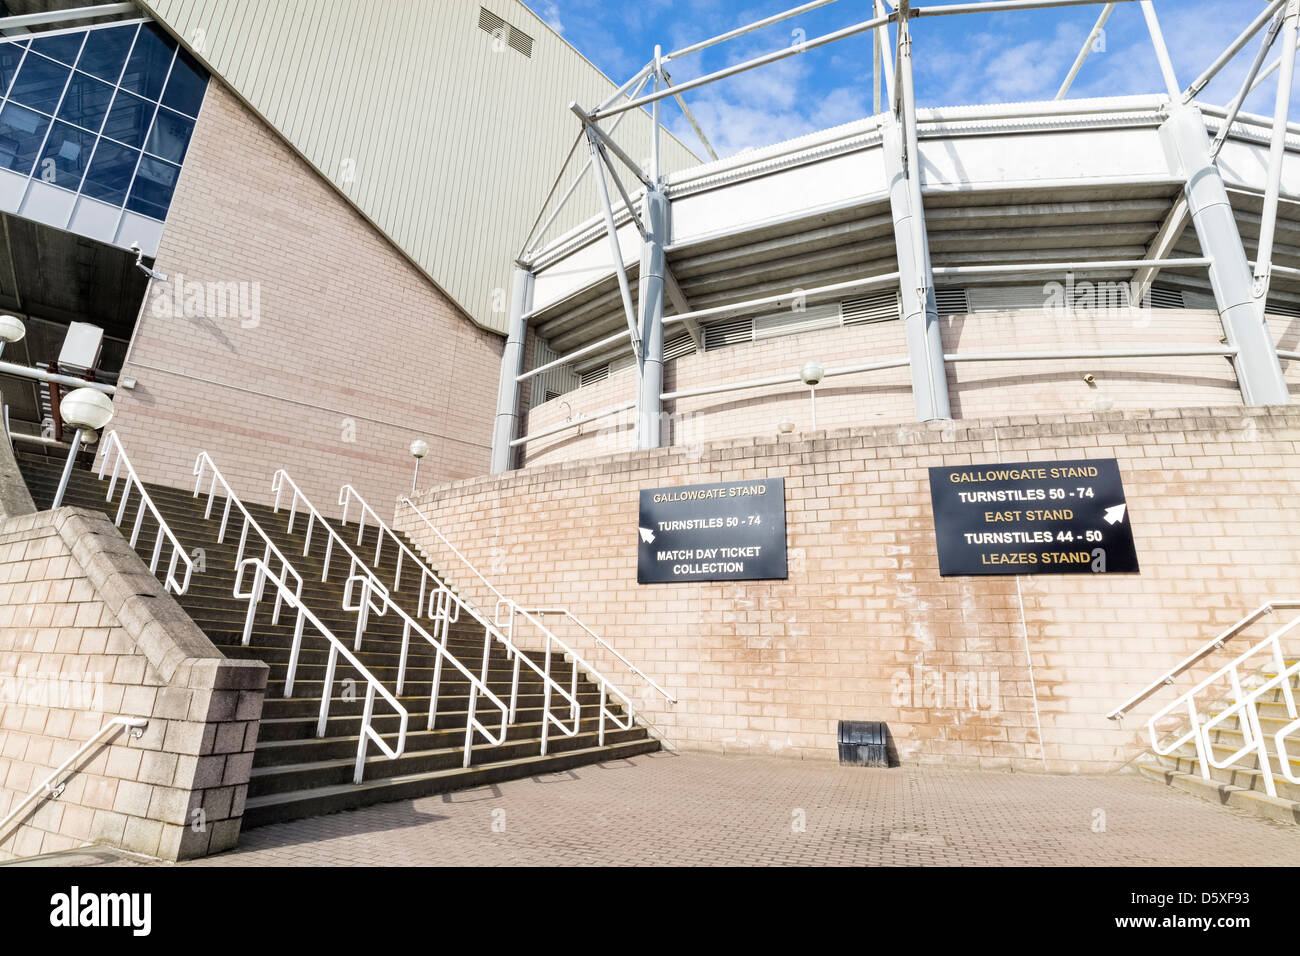 St James Park Stand Gallowgate Newcastle United Football club. Banque D'Images